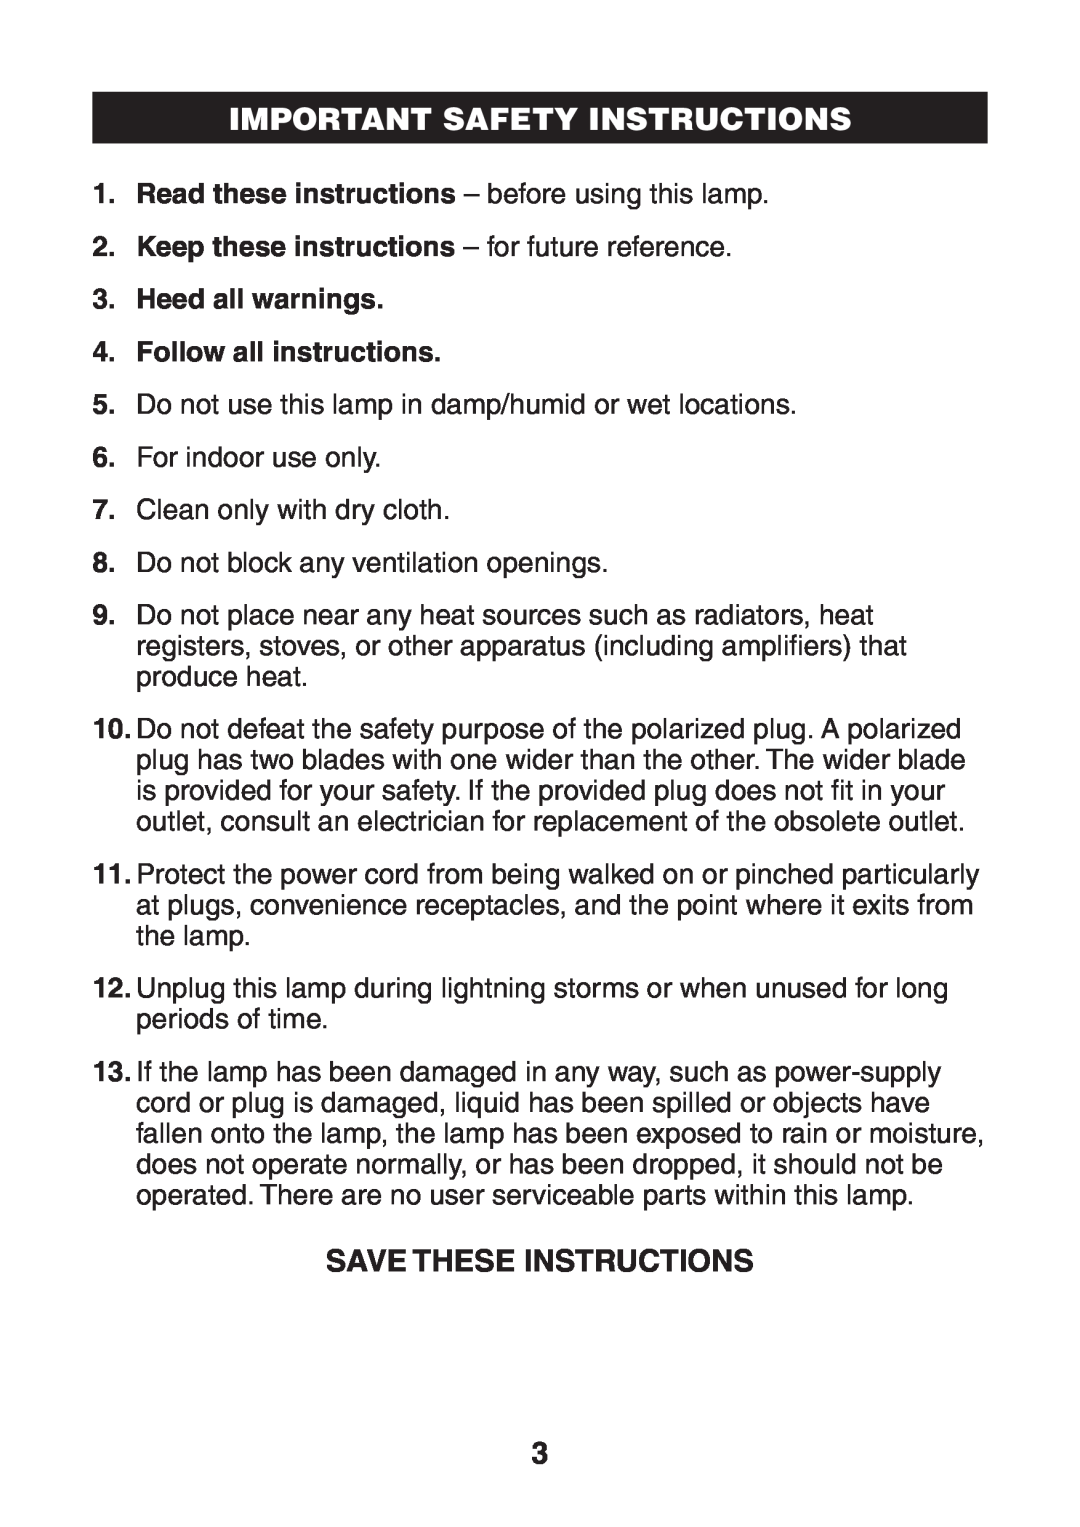 Verilux VT04 manual Save These Instructions, Important Safety Instructions, Keep these instructions - for future reference 